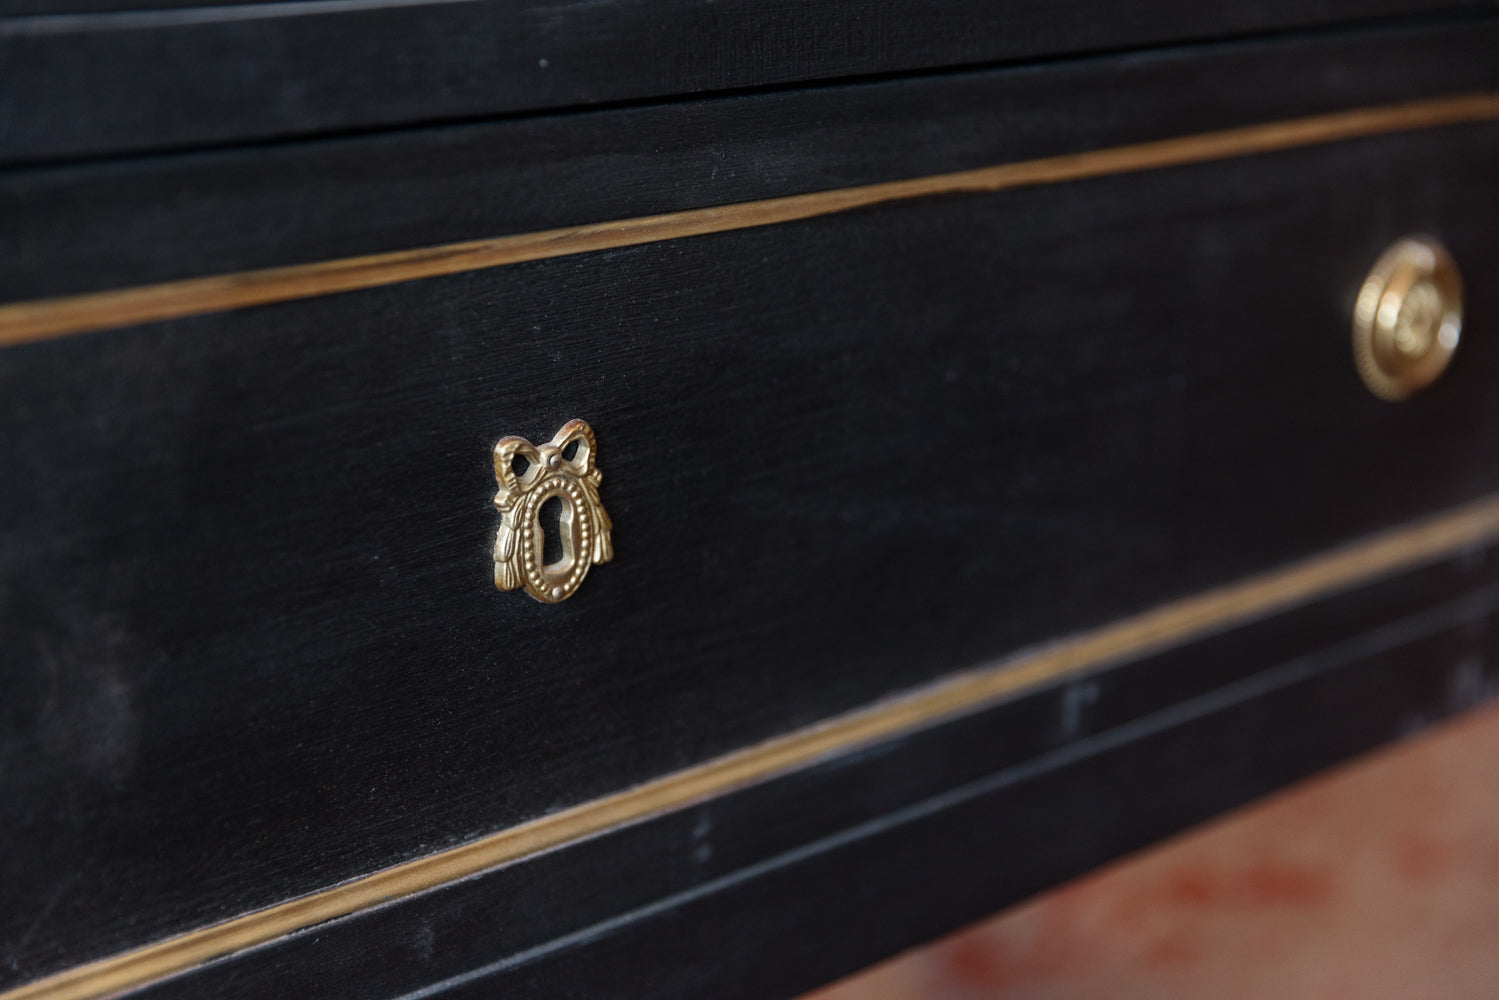 French Louis XVI Style 1950's Ebonished Chest Of Drawers